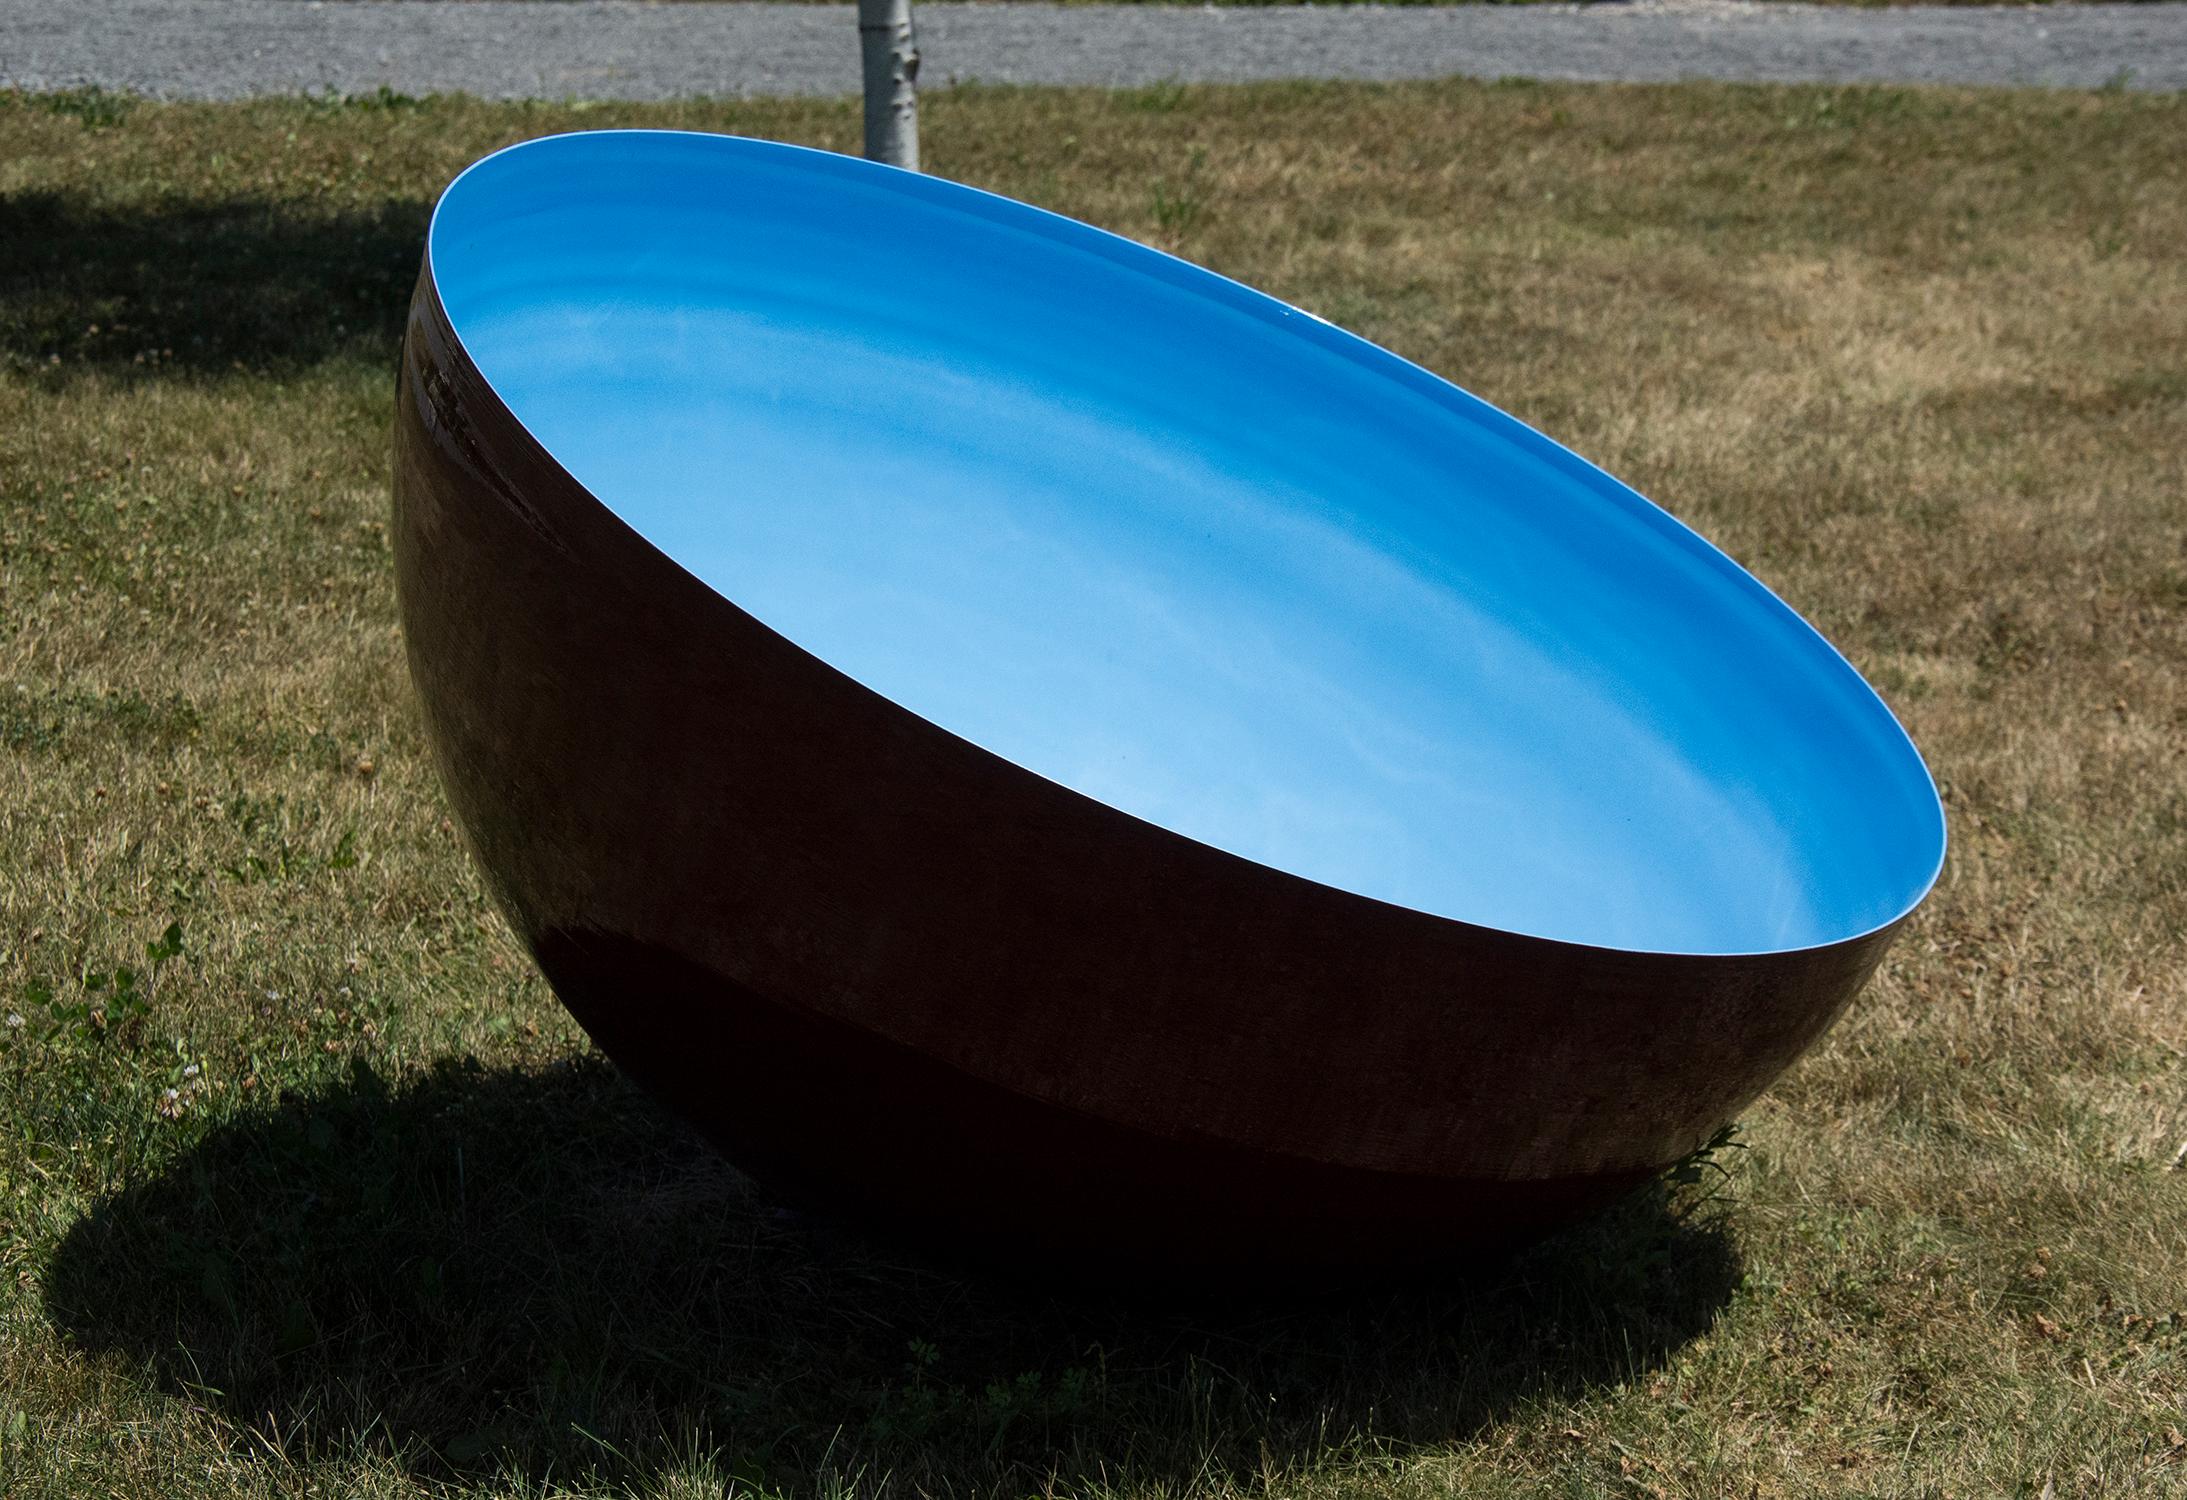 Singing Bowl Cerulean Sky Large - outdoor steel sculpture in blue & red - Contemporary Sculpture by Marlene Hilton Moore